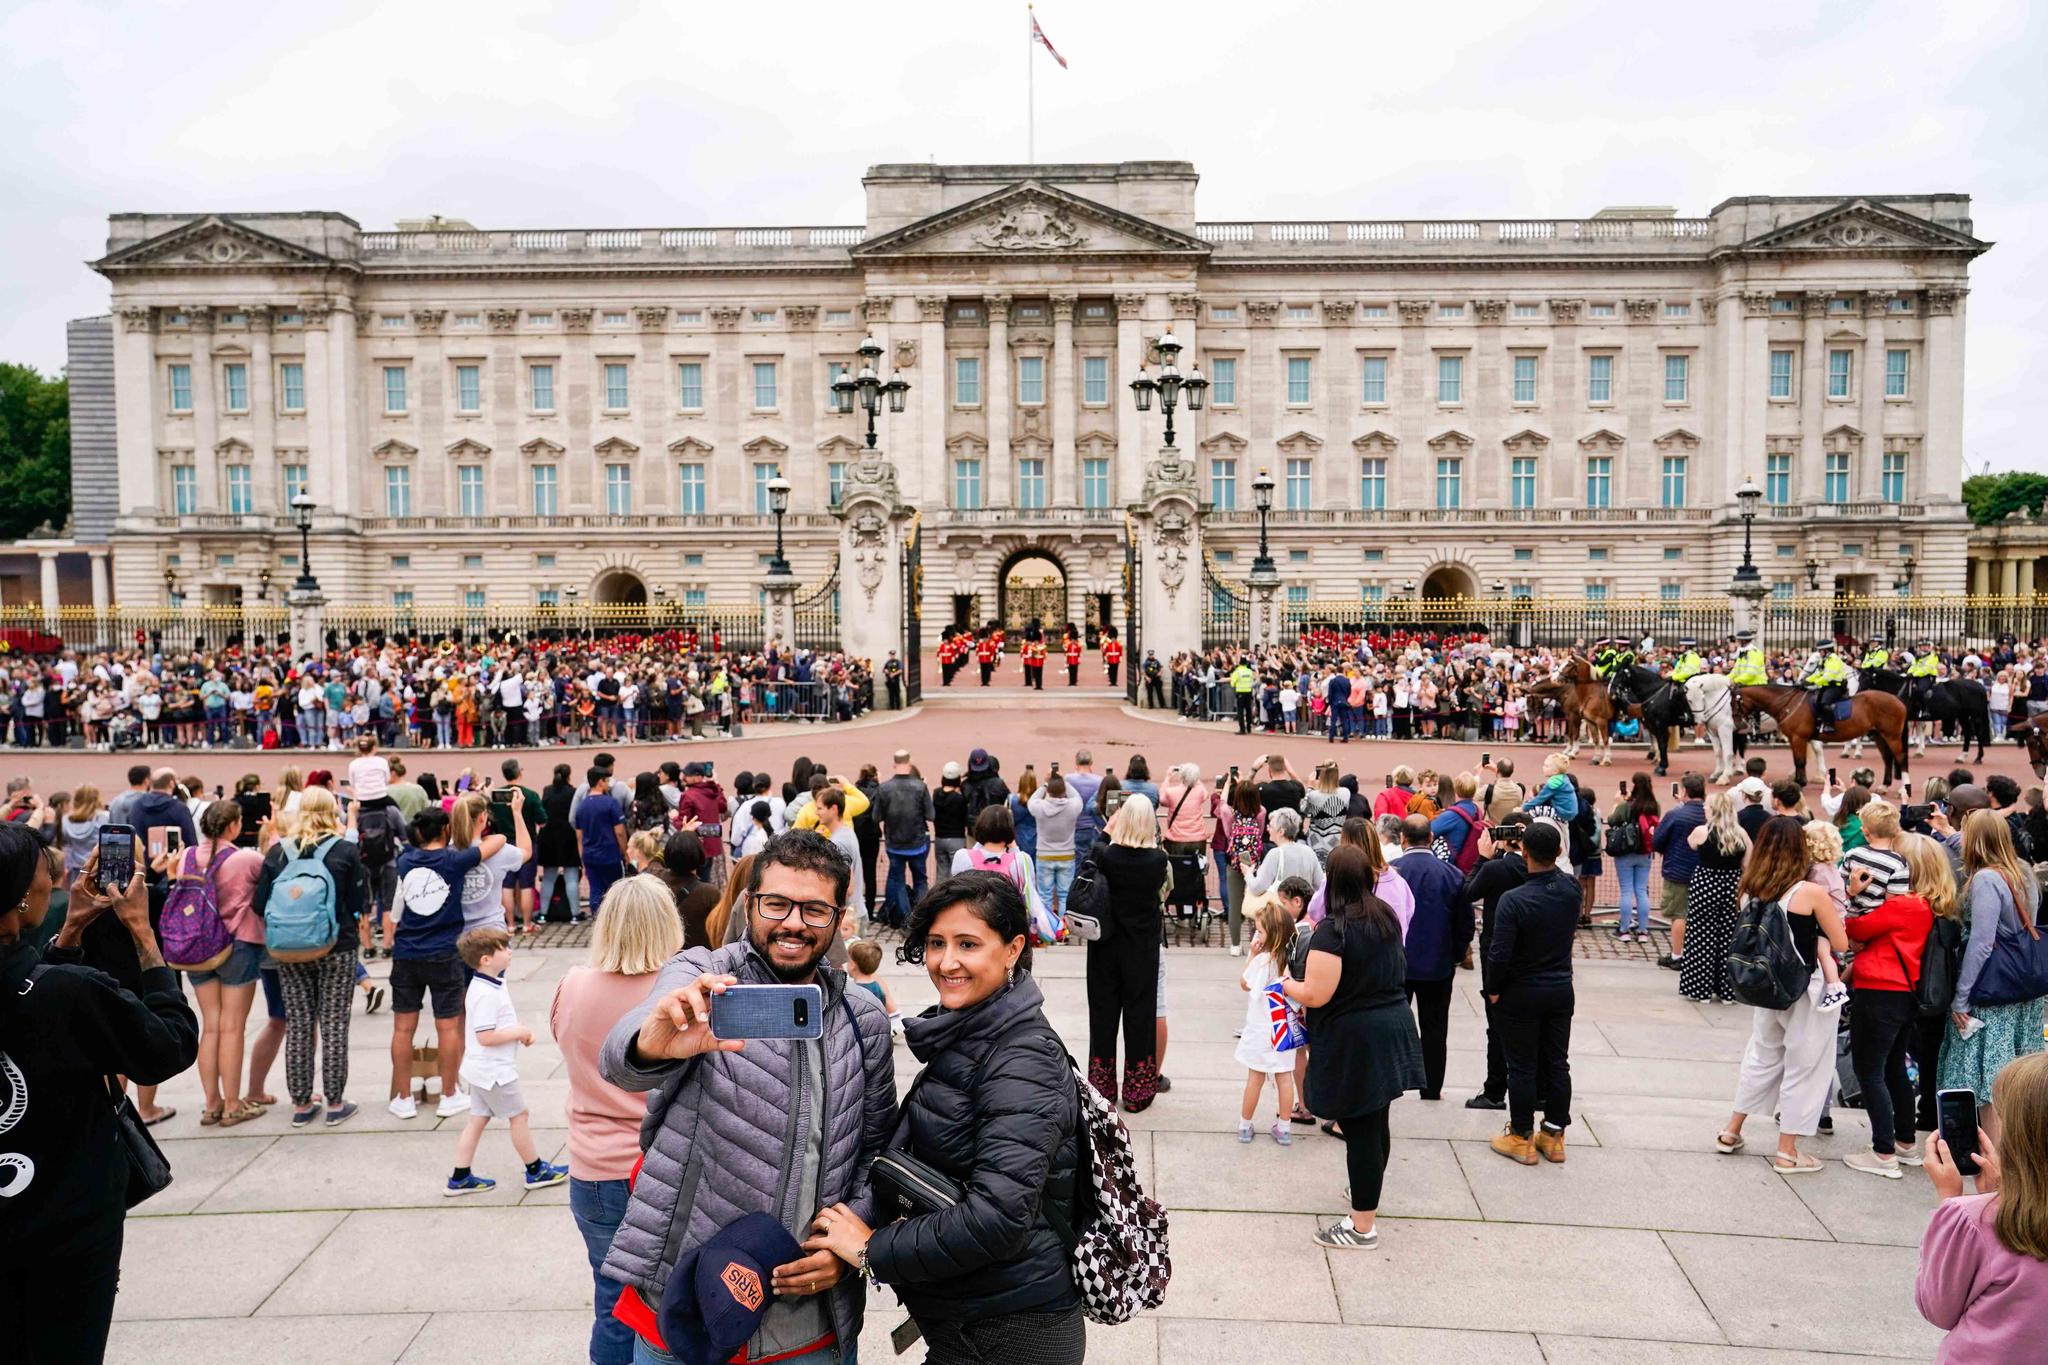 Members of the public watch the Changing of the Guard ceremony at Buckingham Palace, London, Aug. 23, 2021, which is taking place for the first time since the start of the coronavirus pandemic.